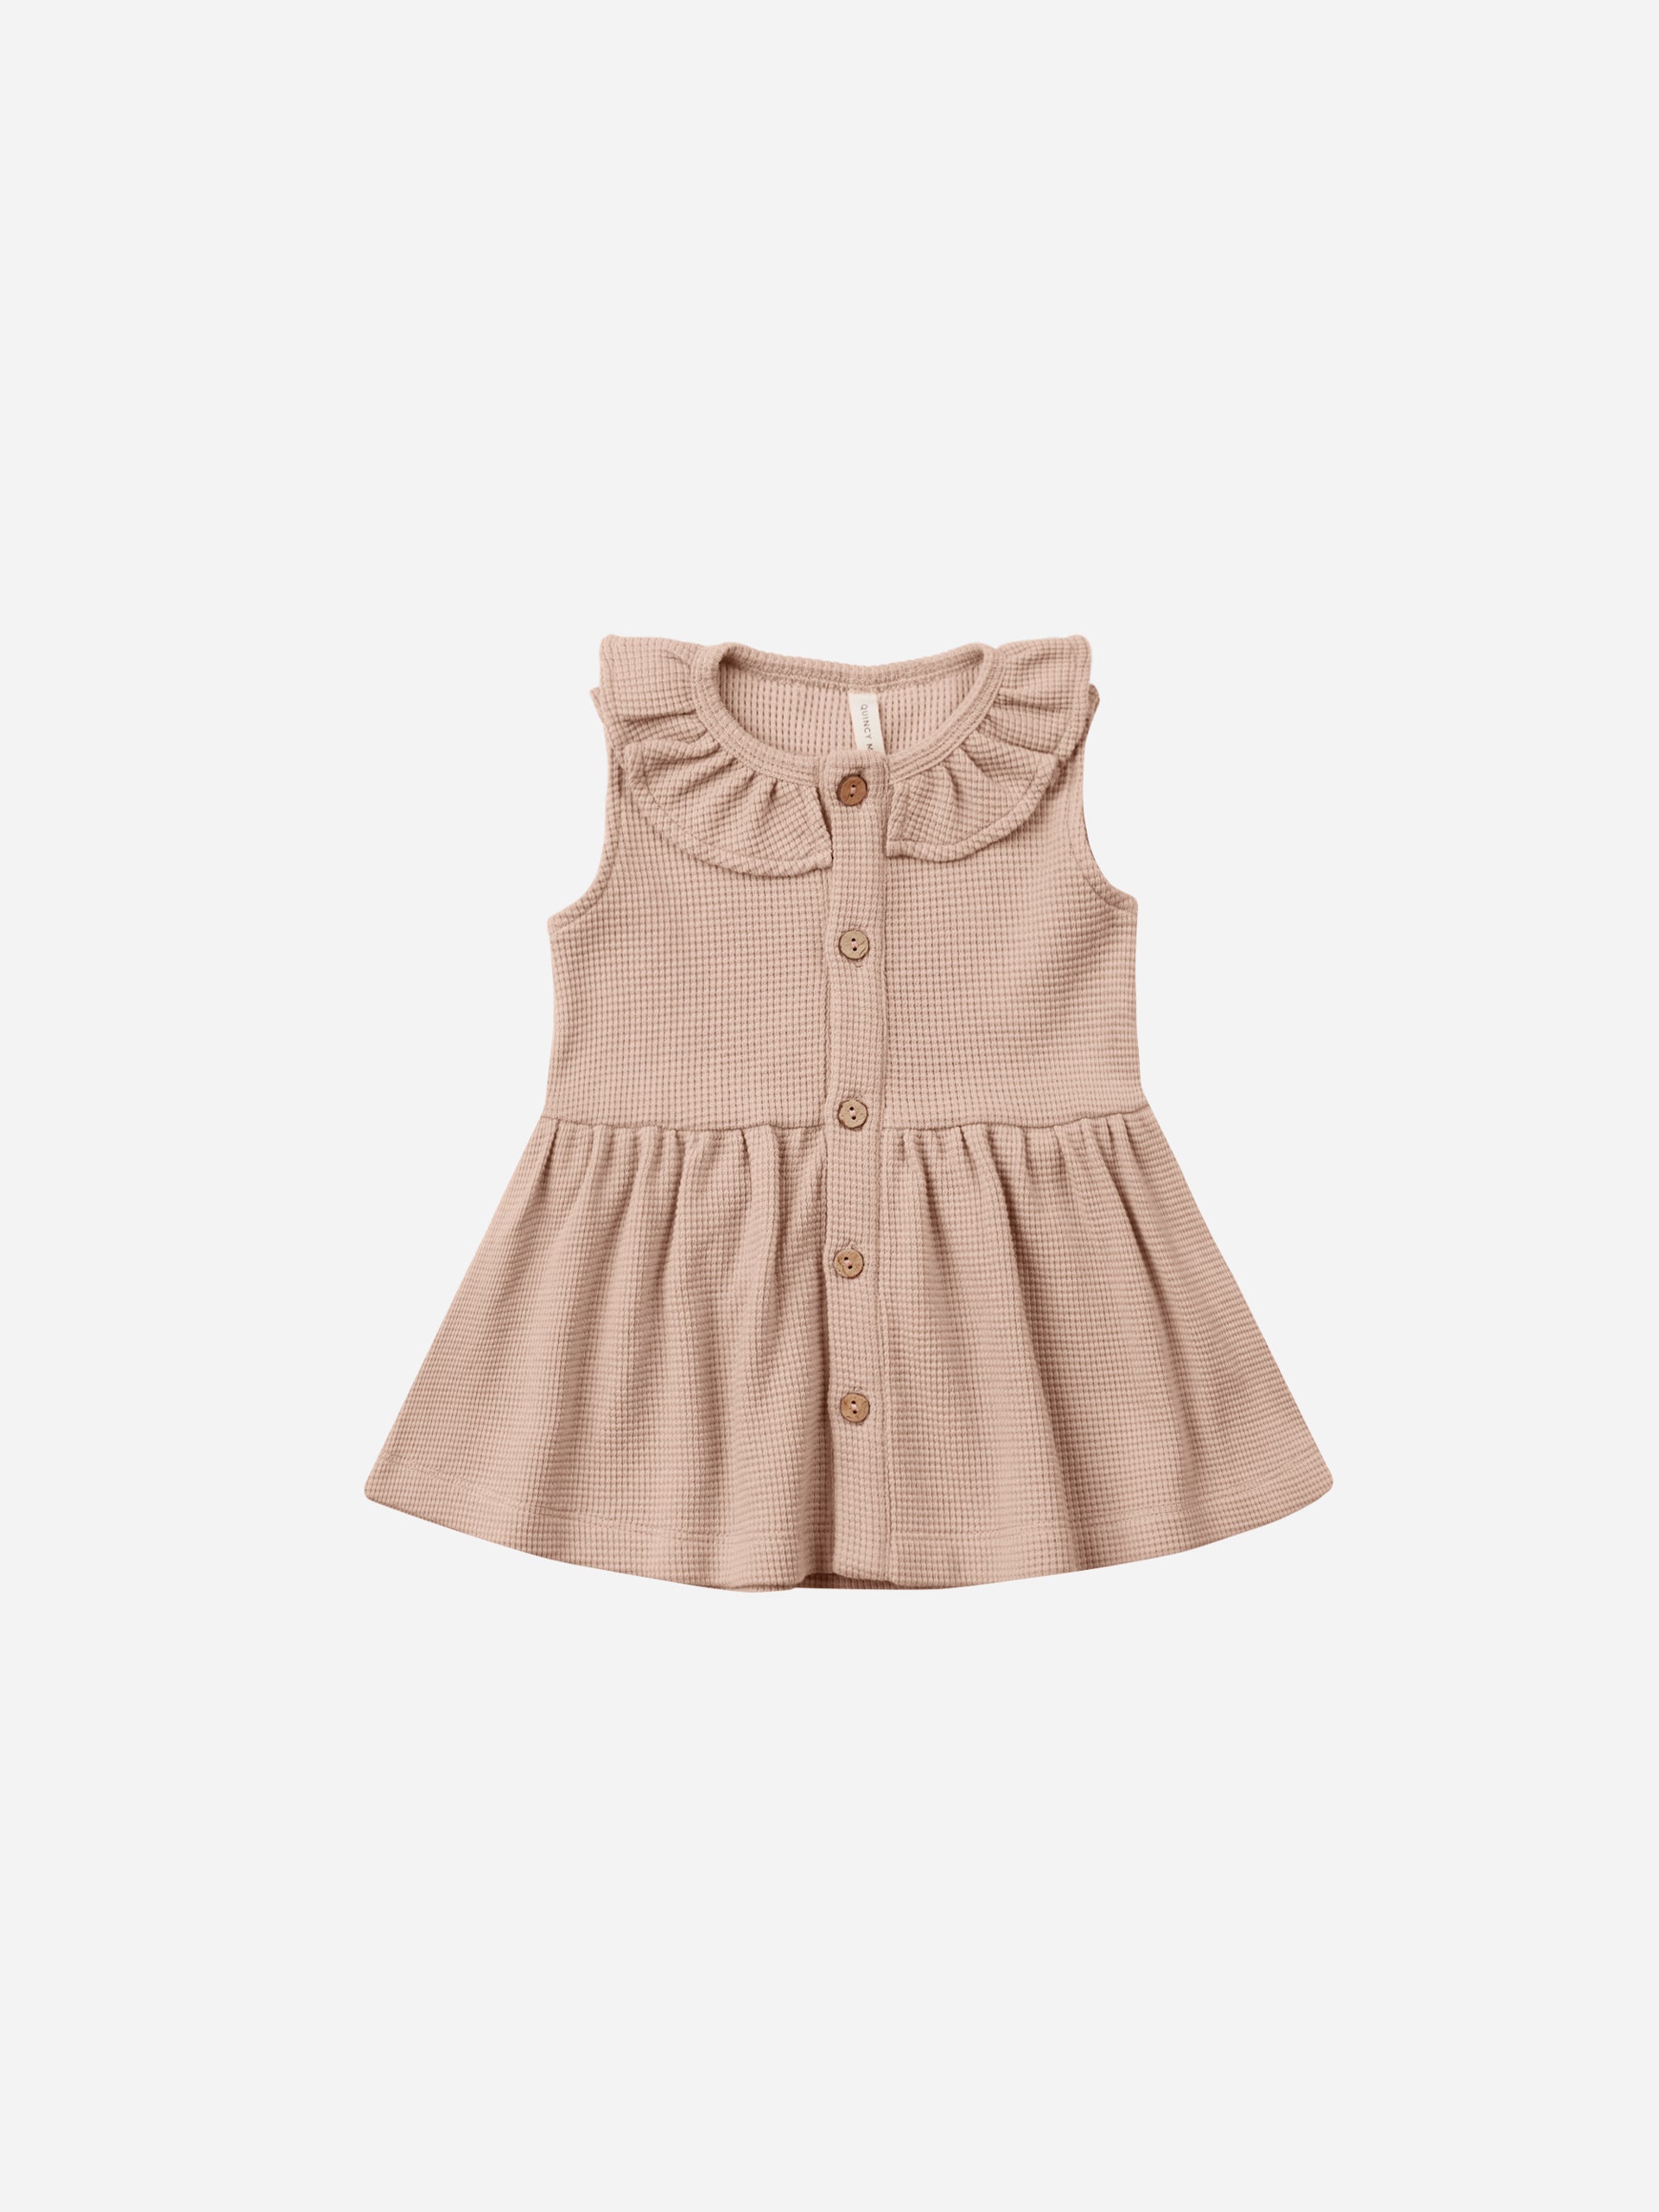 Rue Tank Dress || Blush - Rylee + Cru | Kids Clothes | Trendy Baby Clothes | Modern Infant Outfits |